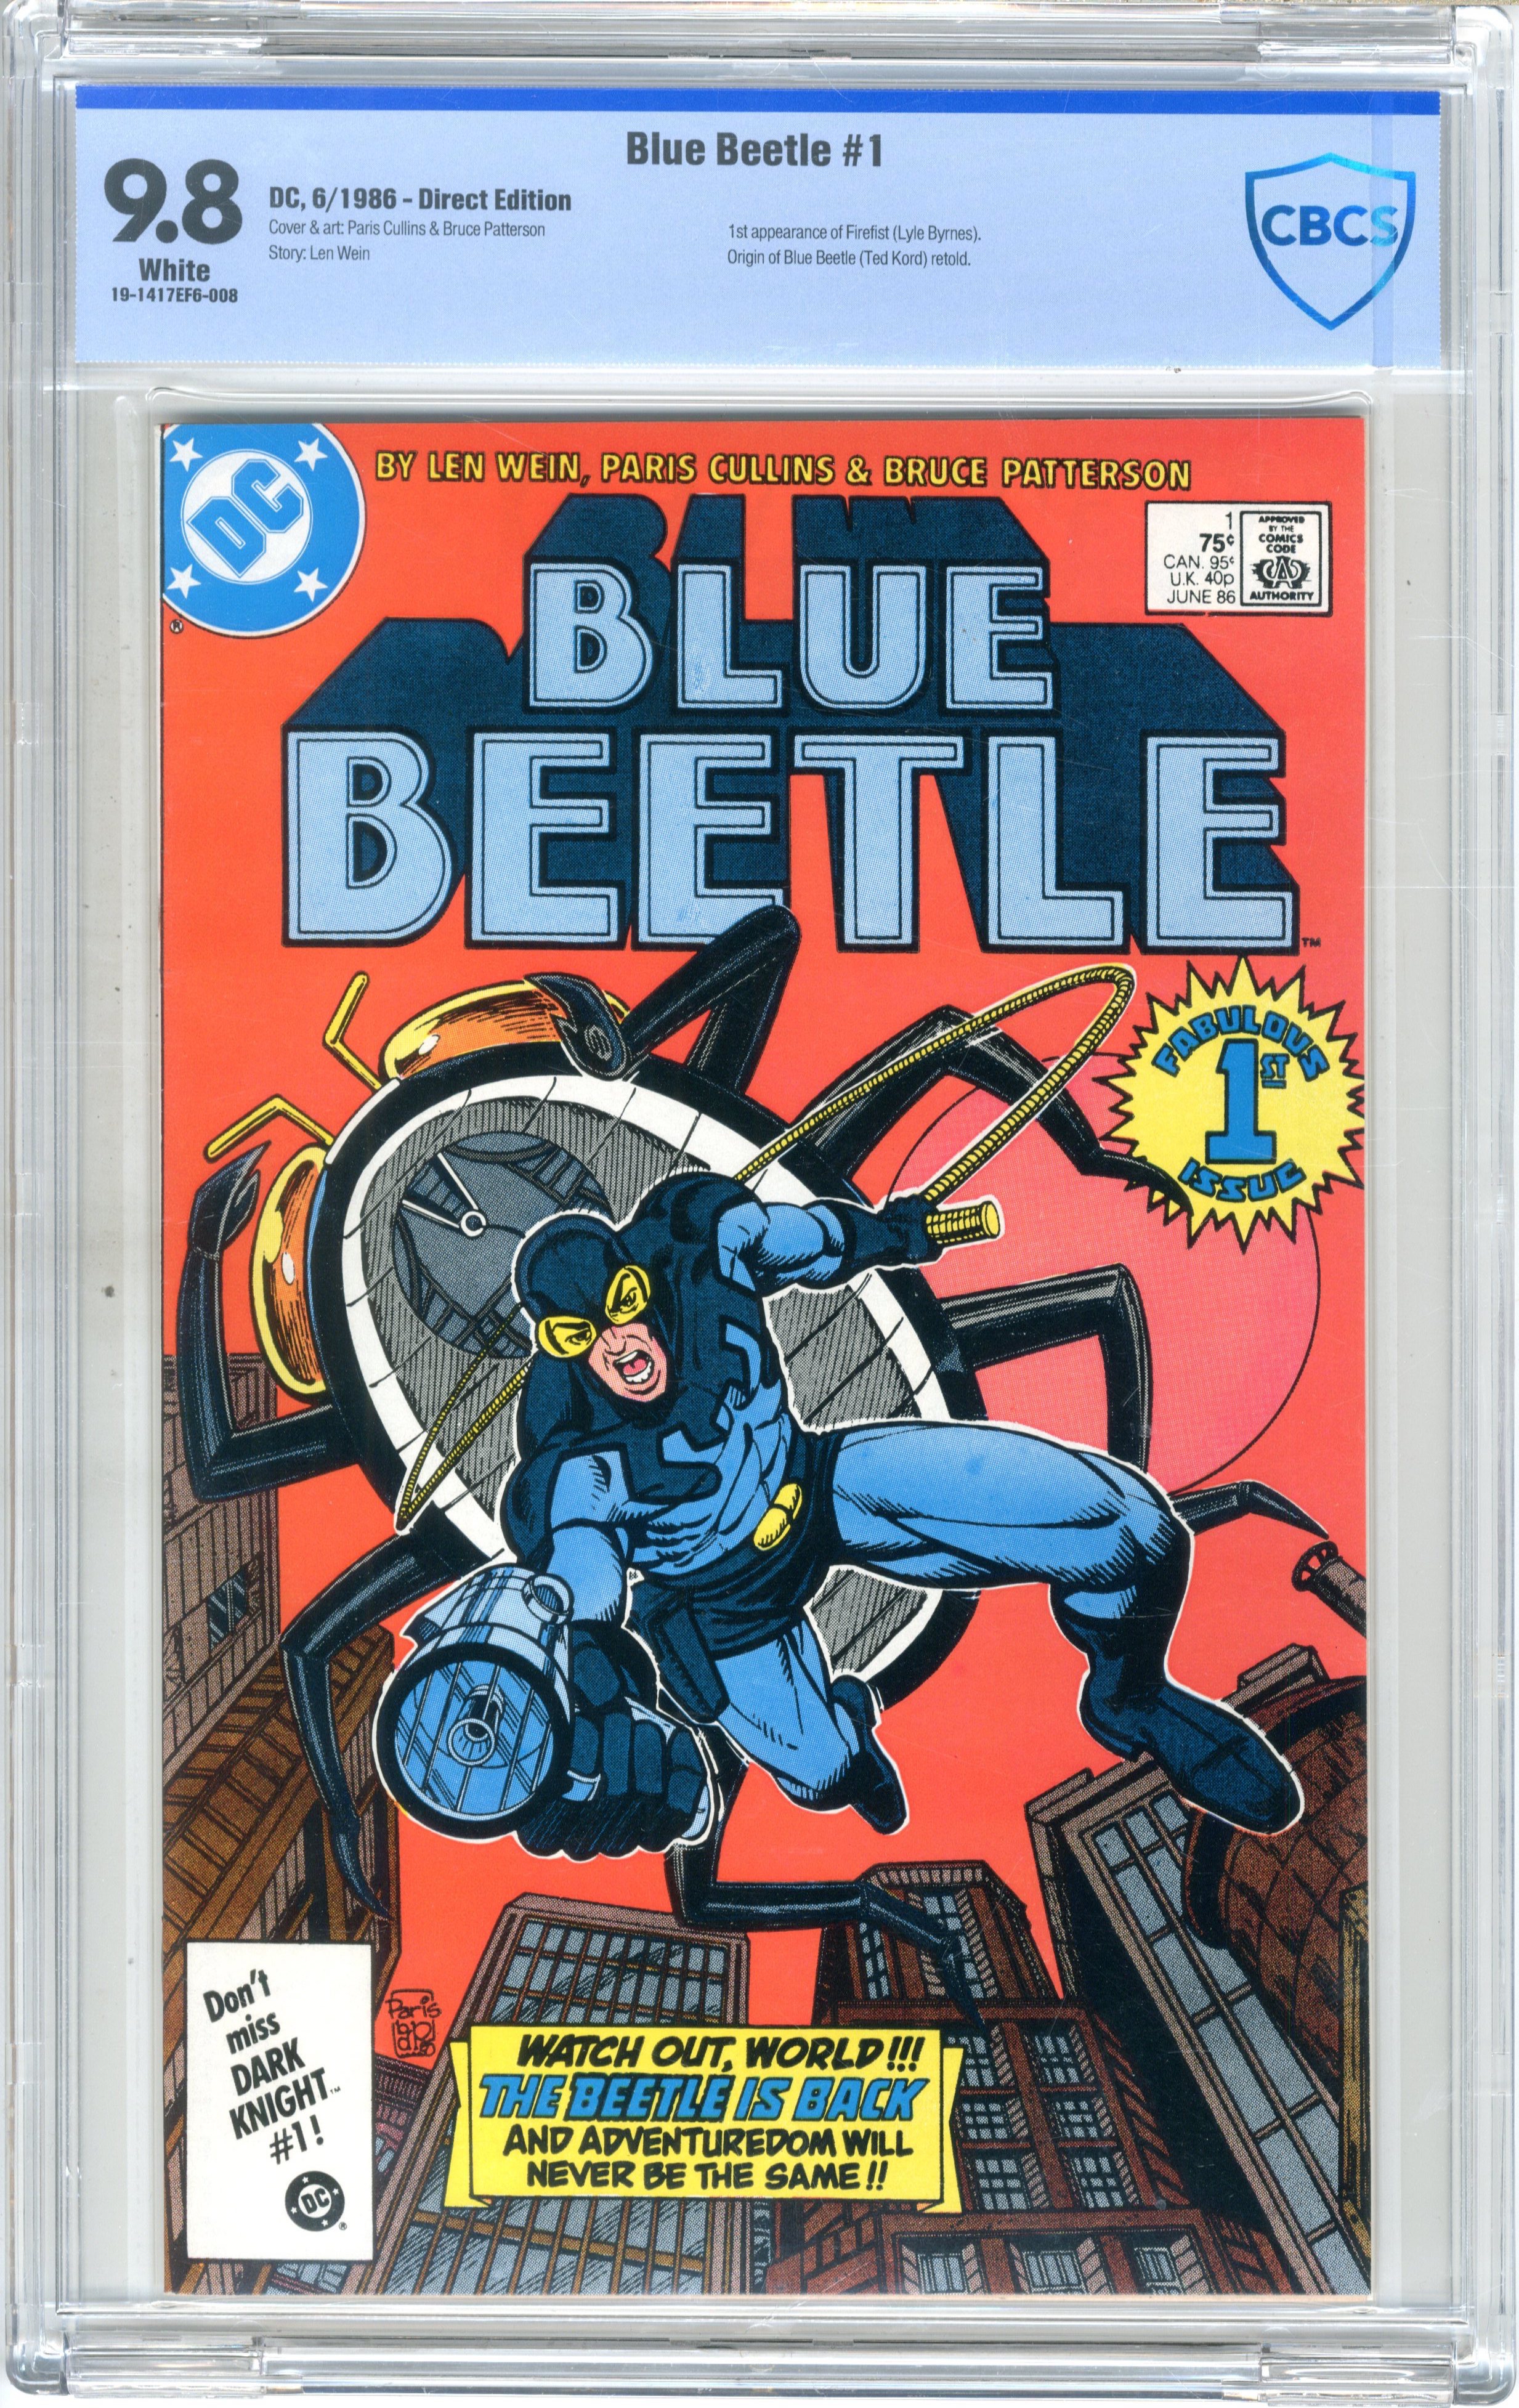 It's Time for the World to Meet 'Blue Beetle' – The Nerds of Color